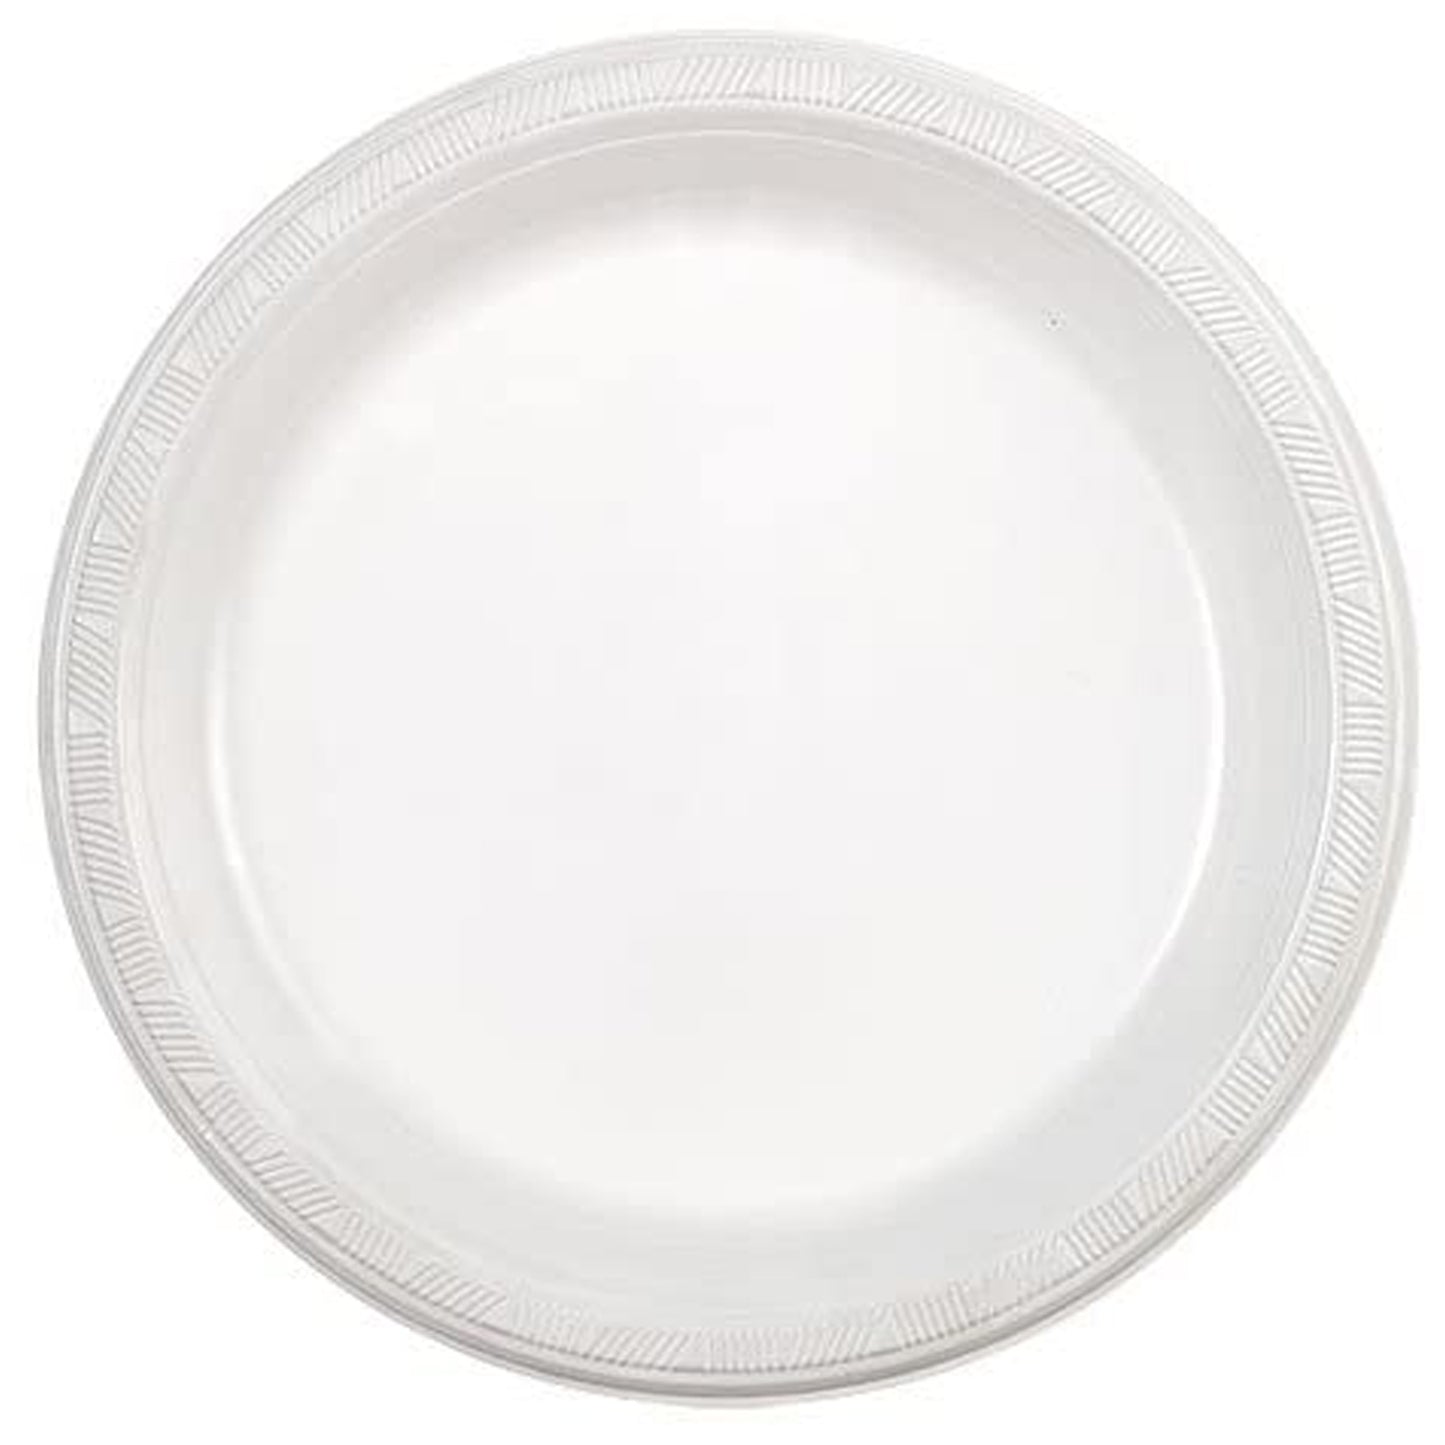 Party Dimensions Round White Party Plastic Plates 9" Plastic Plates Party Dimensions 10 PIECES  